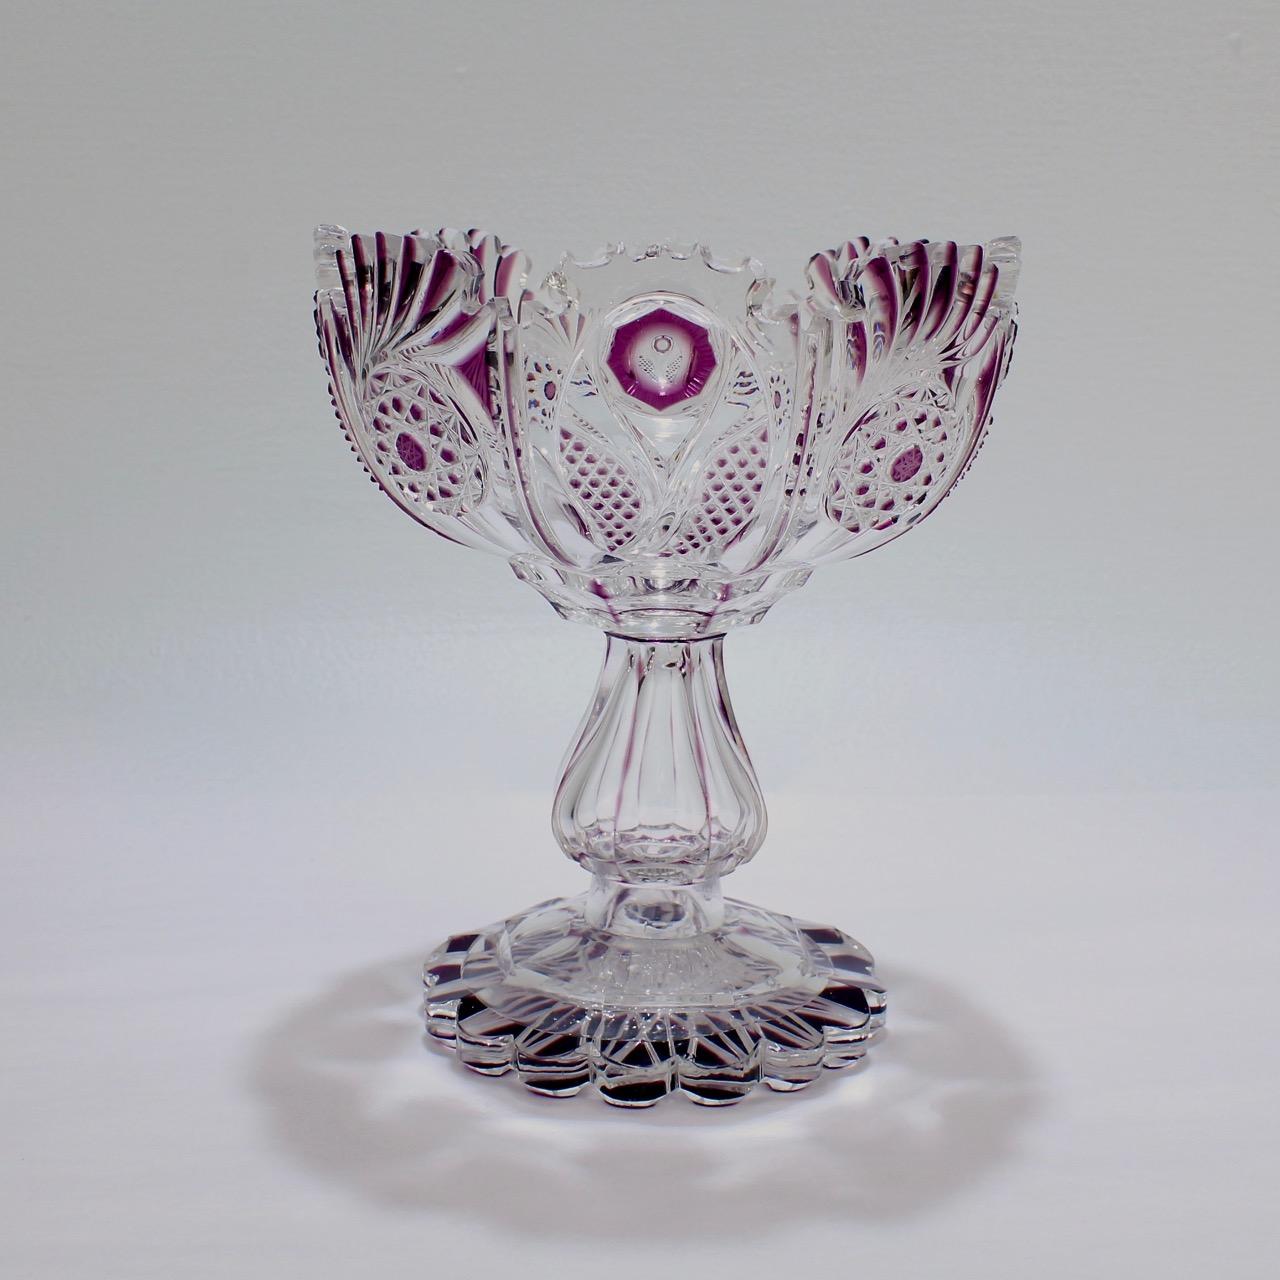 A good Bohemain glass footed bowl or compote.

Likely produced by Graf Harrach Glassworks. 

With a cased purple overlay (the first layer of glass) and extensive cuts throughout including to the base.

A fine example of early 19th century